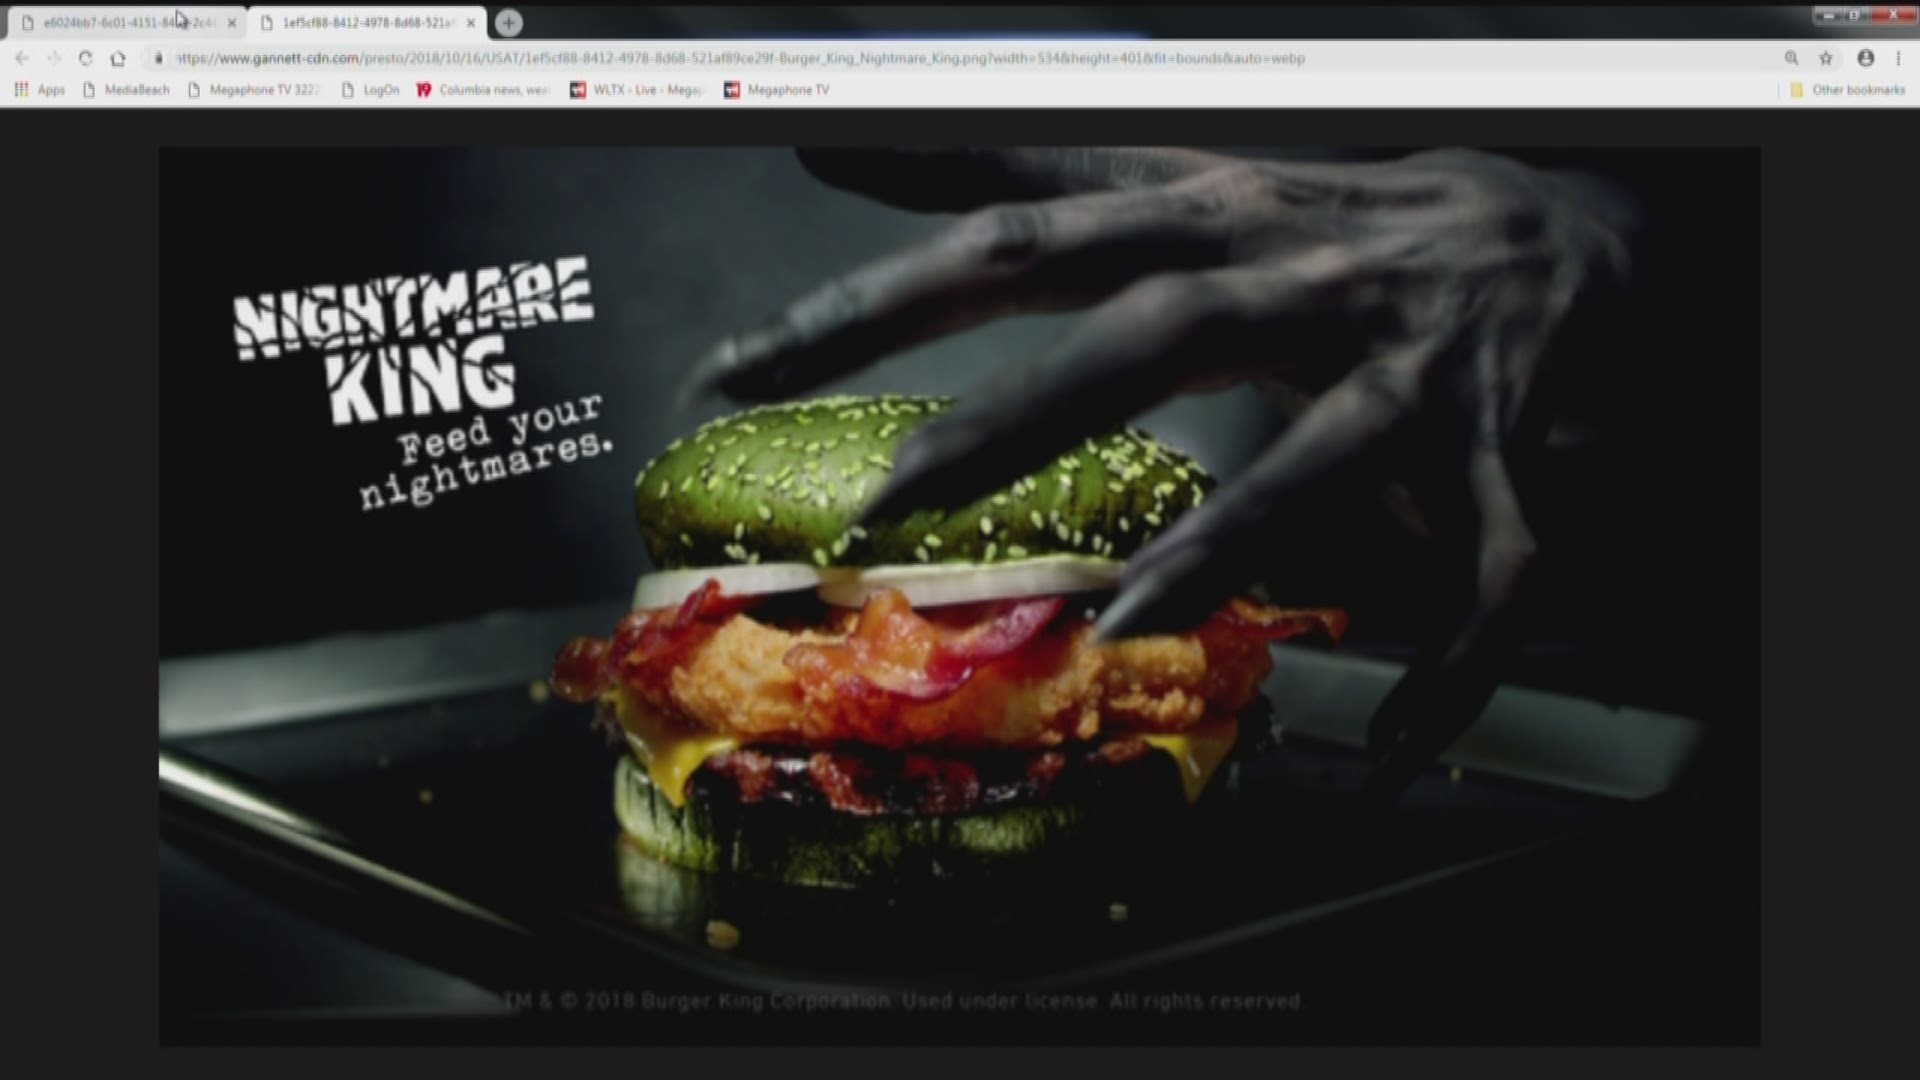 The burger chain says their new sandwich is clinically proven to give people nightmares.